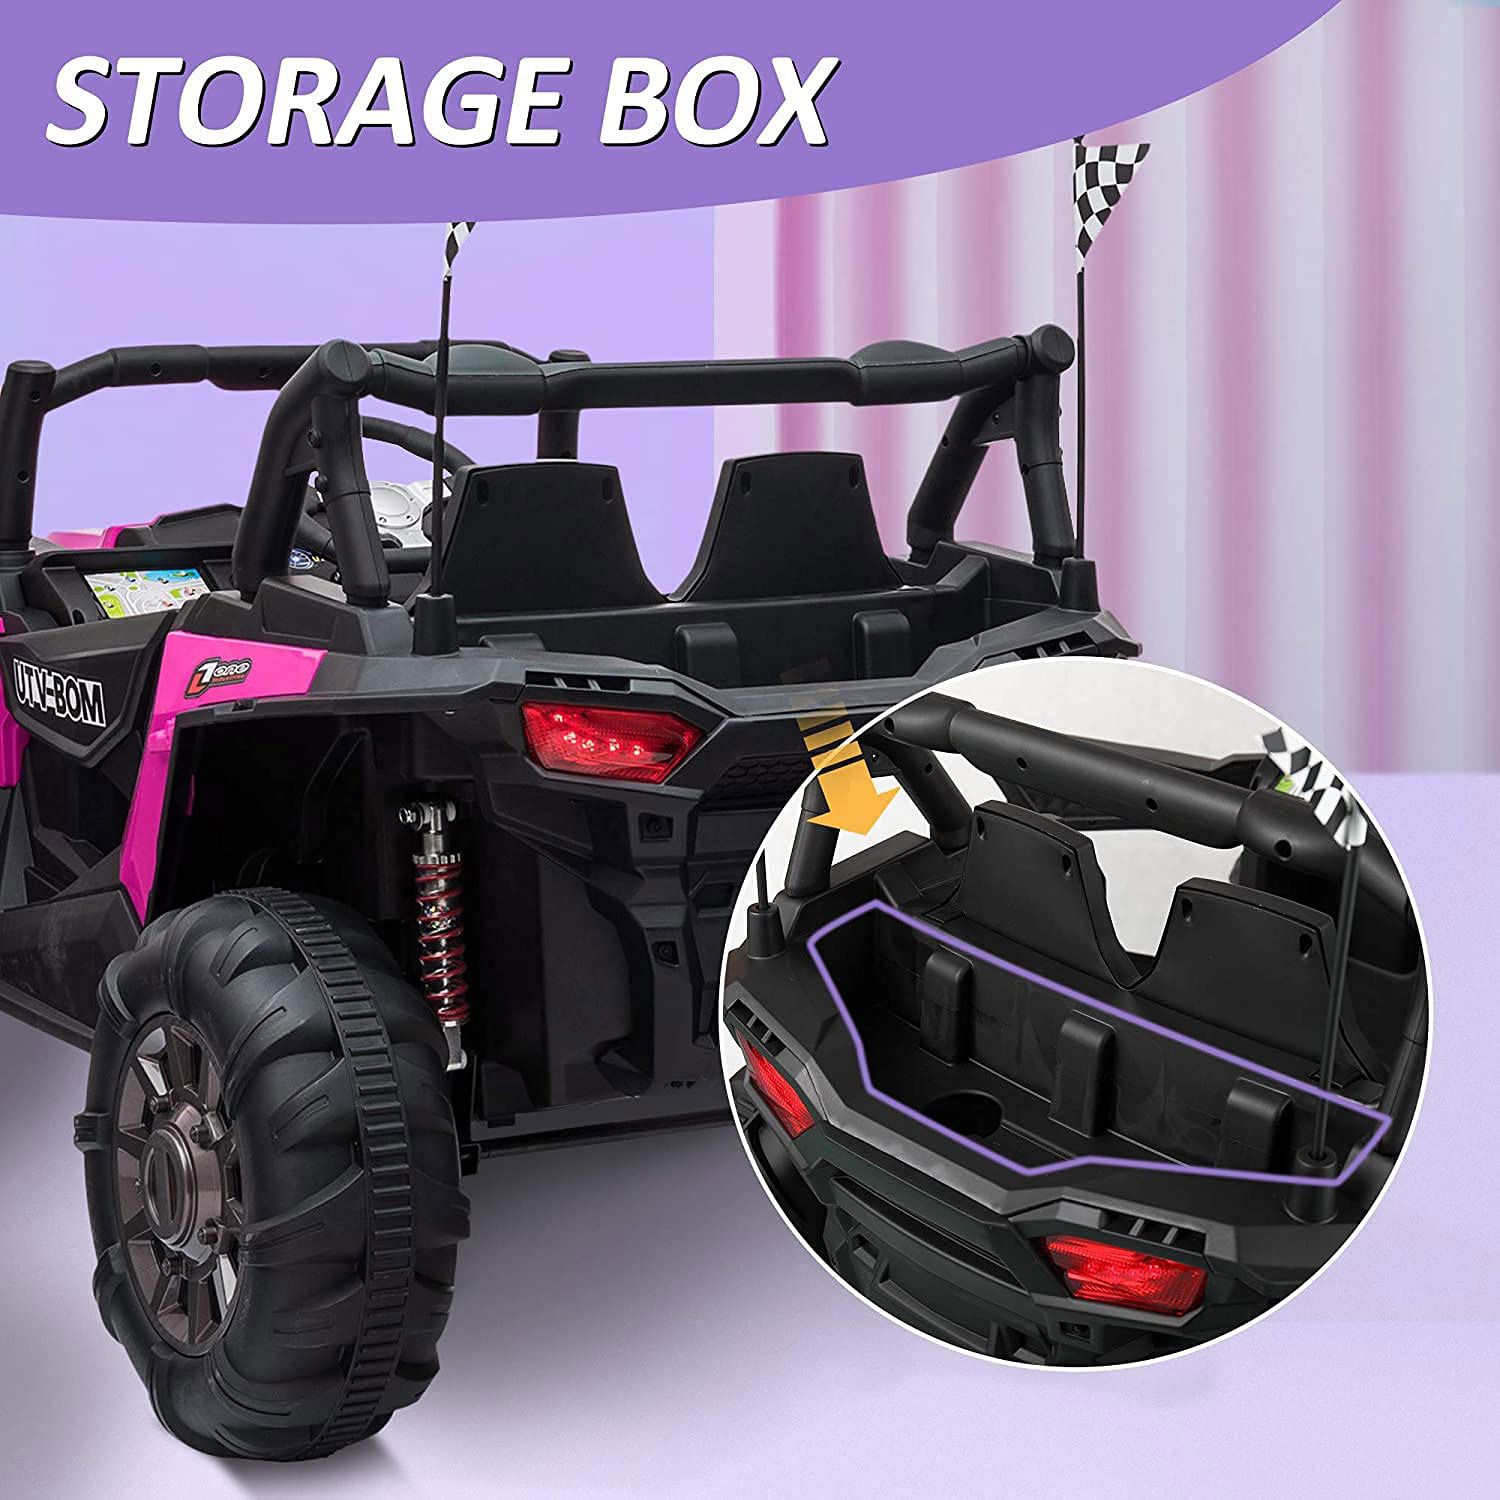 💕💕 !!BRAND NEW 12Volt Electric Kids REMOTE CONTROL Ride On Truck Powerwheels Off Road RZR 2 Seater With LED’s, Media Player BT 